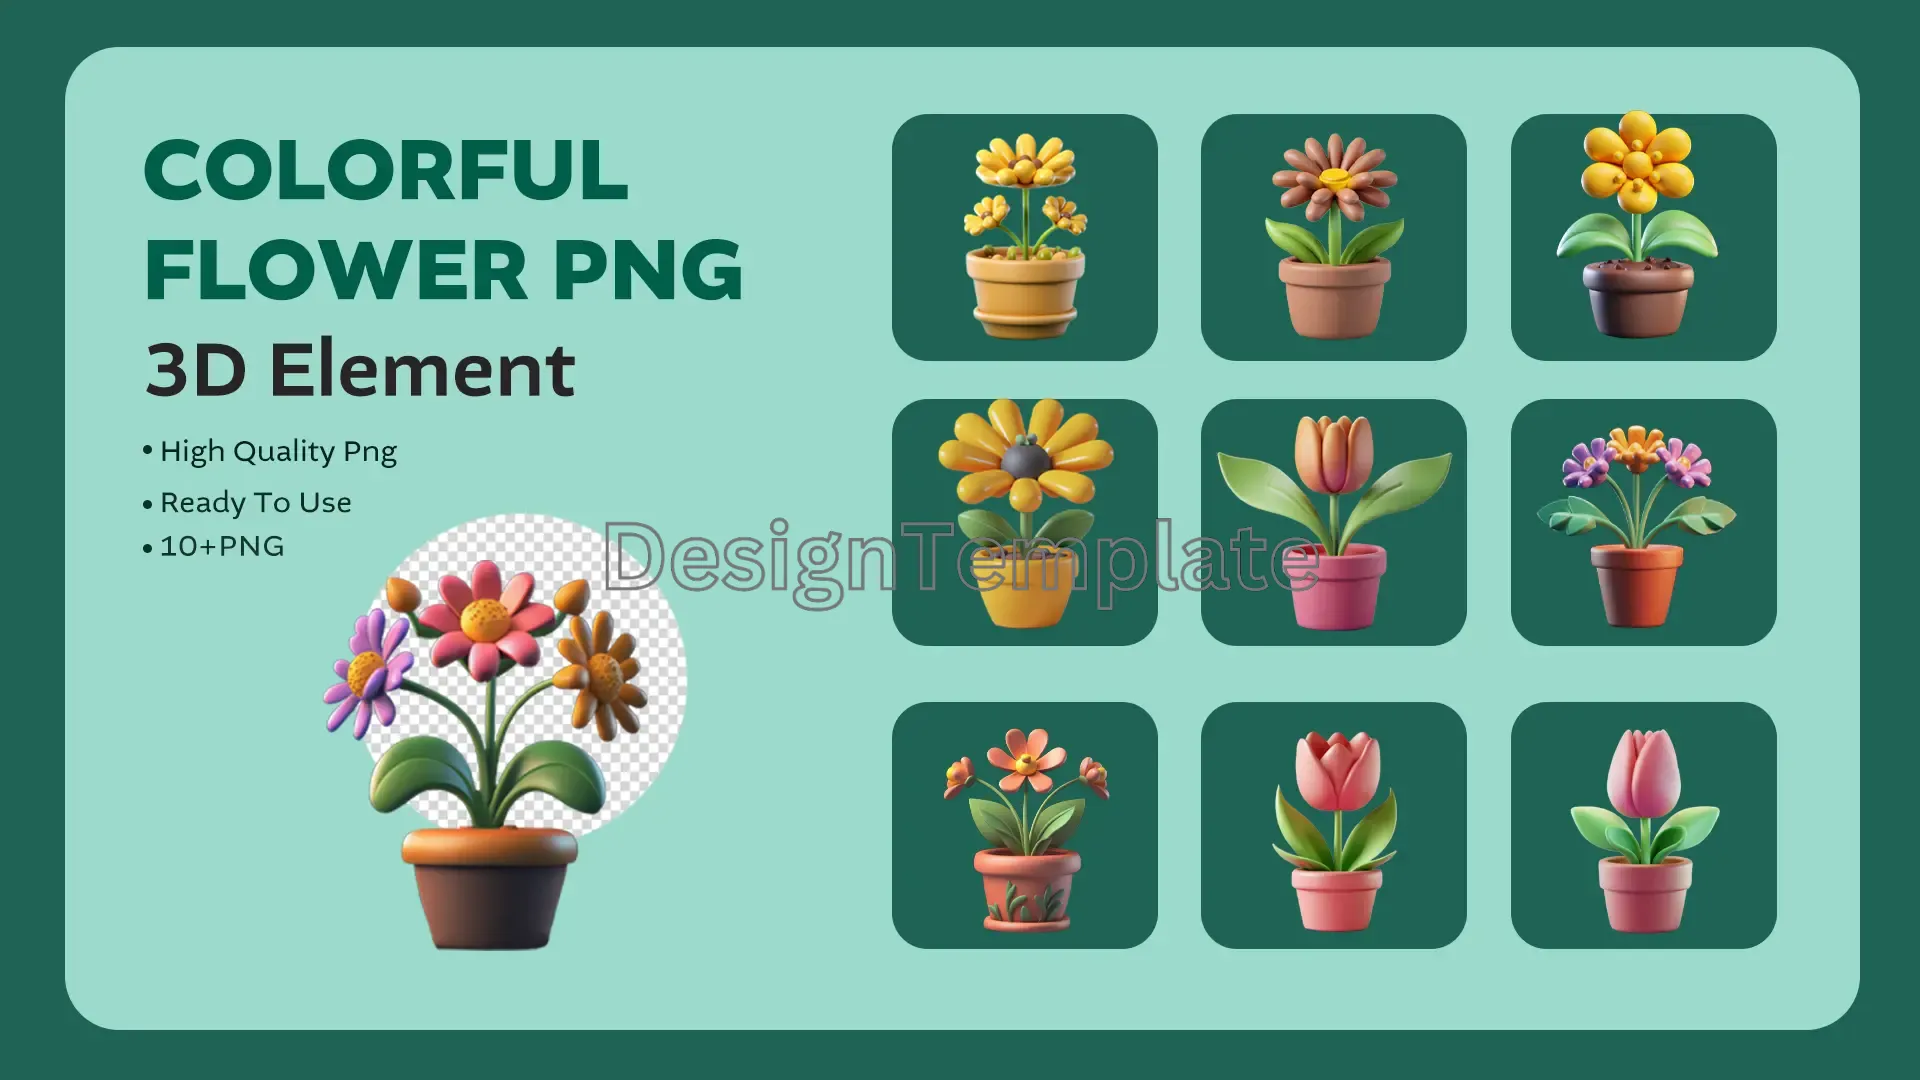 Blooming Brilliance Colorful Flower 3D Element Graphics Pack image